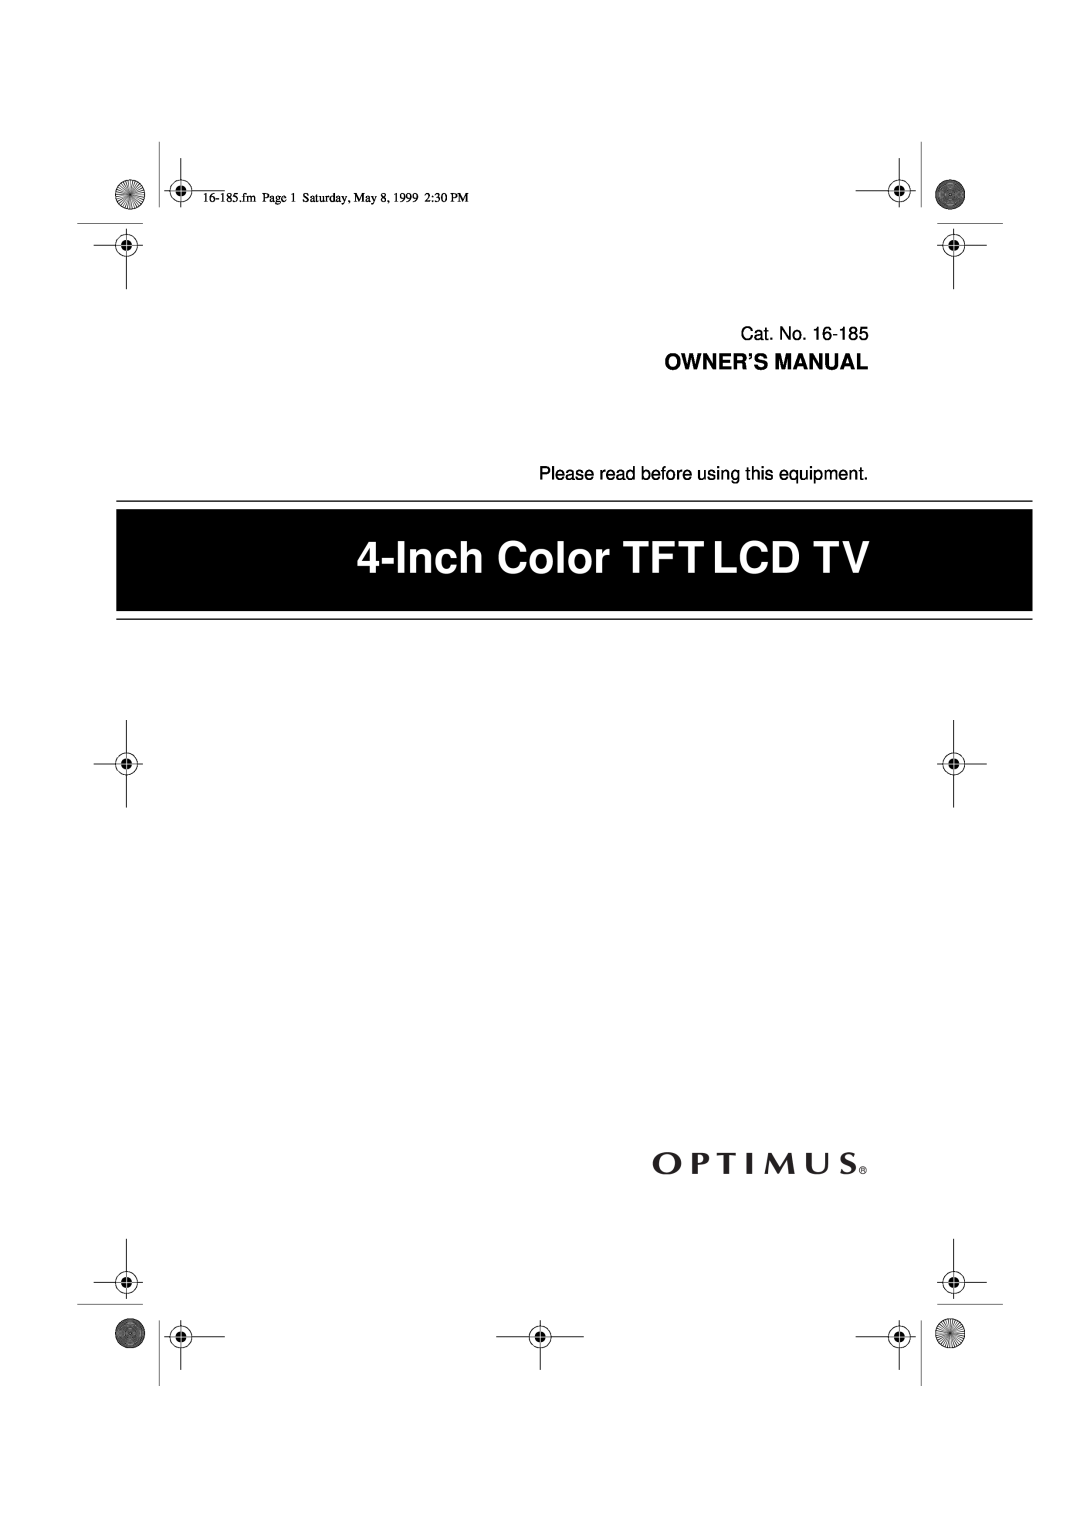 Panasonic 16-185 owner manual Owner’S Manual, Inch Color TFT LCD TV, fm Page 1 Saturday, May 8, 1999 230 PM 